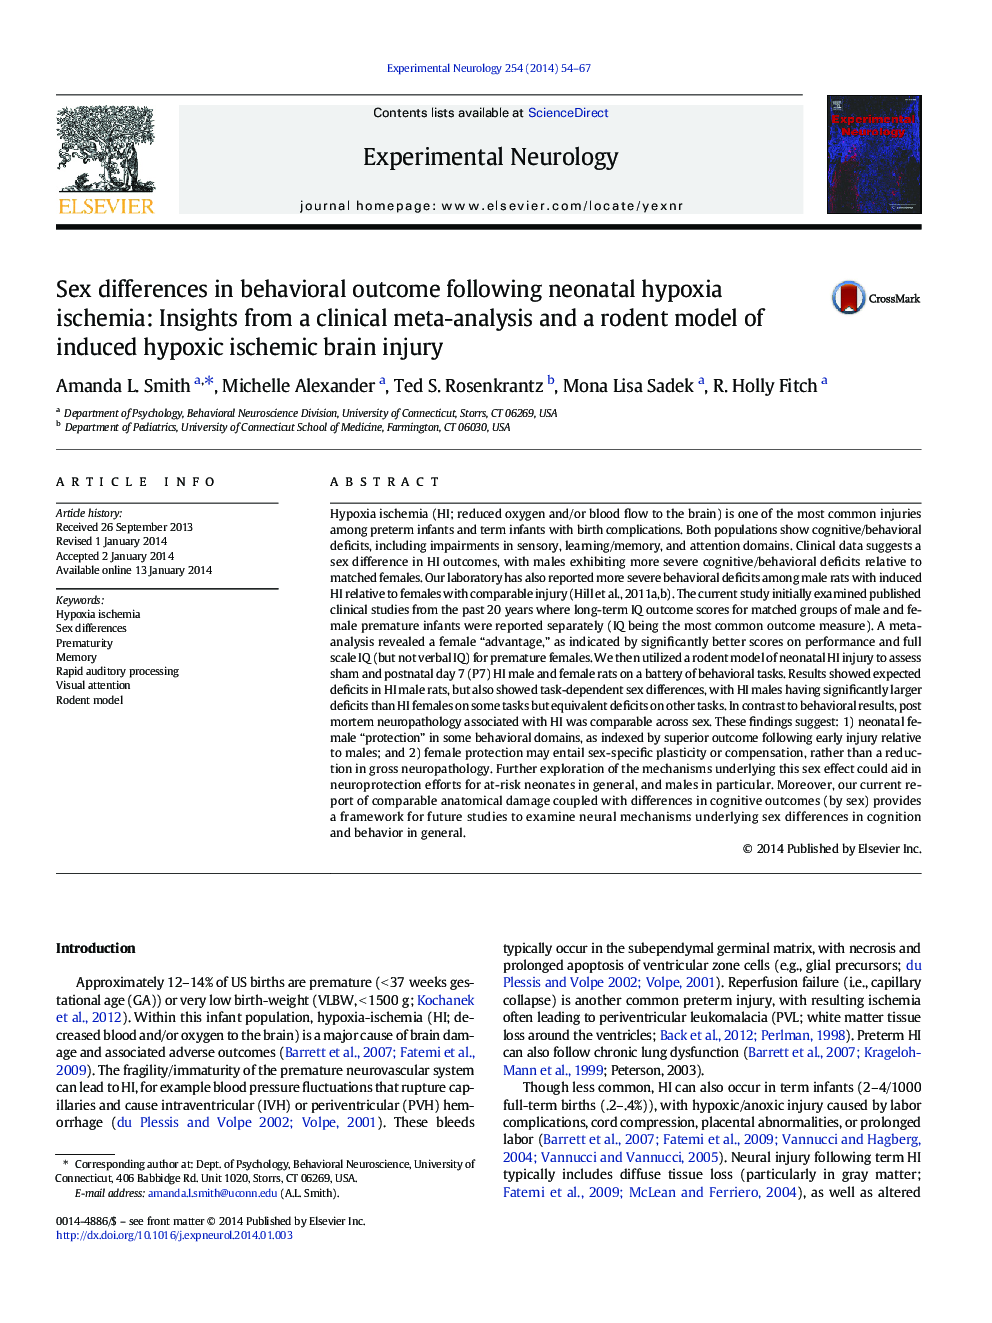 Sex differences in behavioral outcome following neonatal hypoxia ischemia: Insights from a clinical meta-analysis and a rodent model of induced hypoxic ischemic brain injury